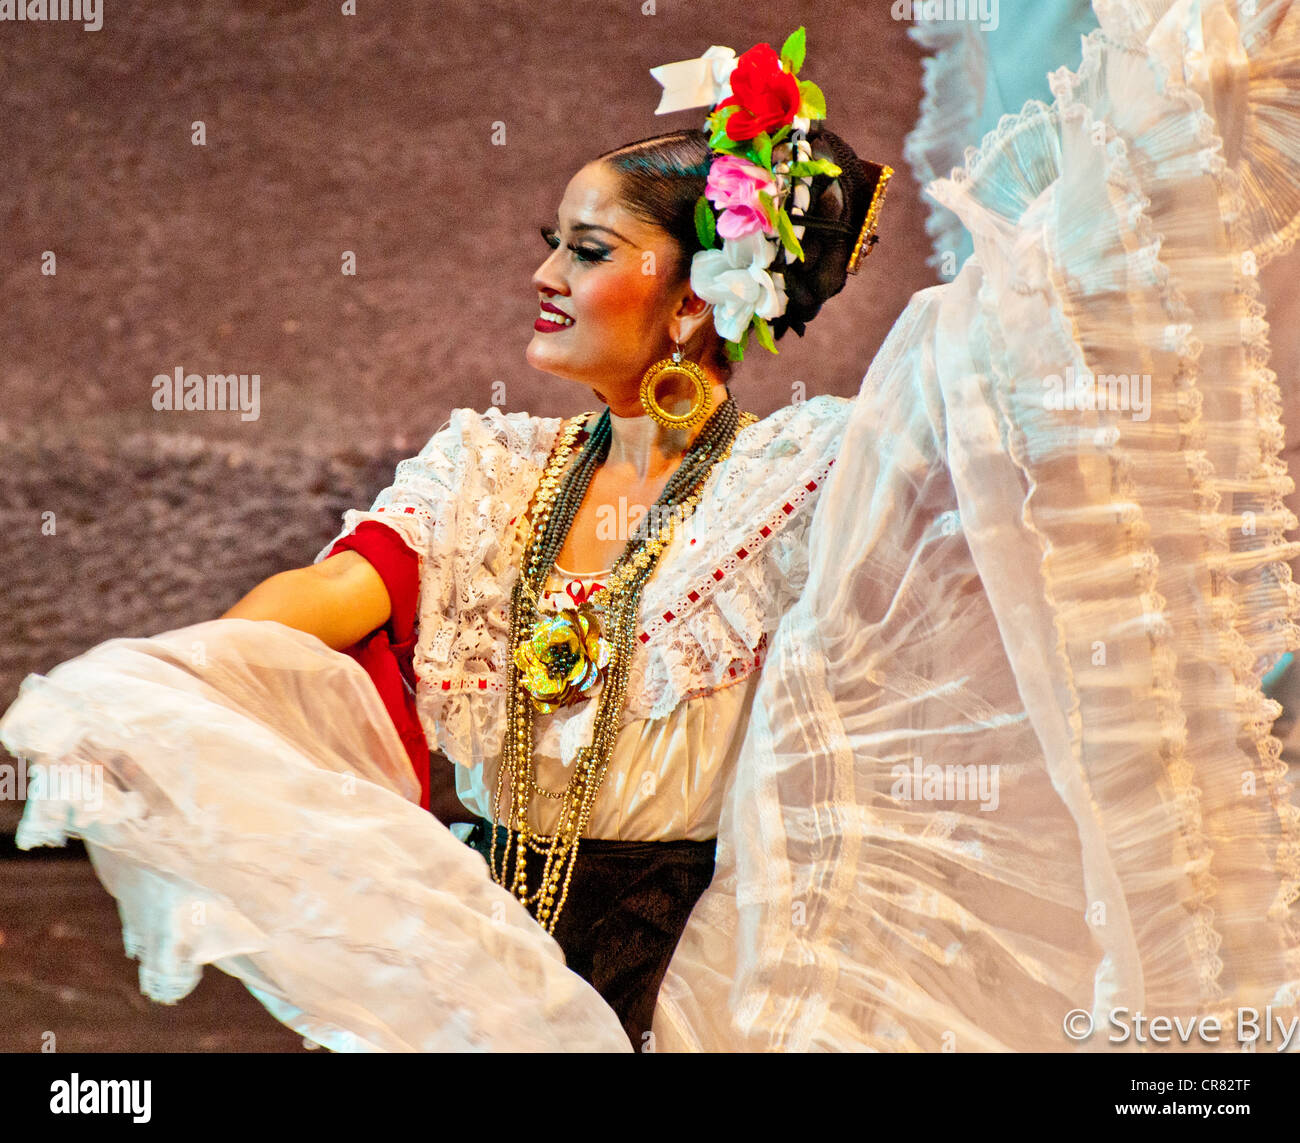 Beatiful Maya dancer in traditional dress performing a folklore dance in Xcaret Park, Riviera Maya, Mexico Stock Photo